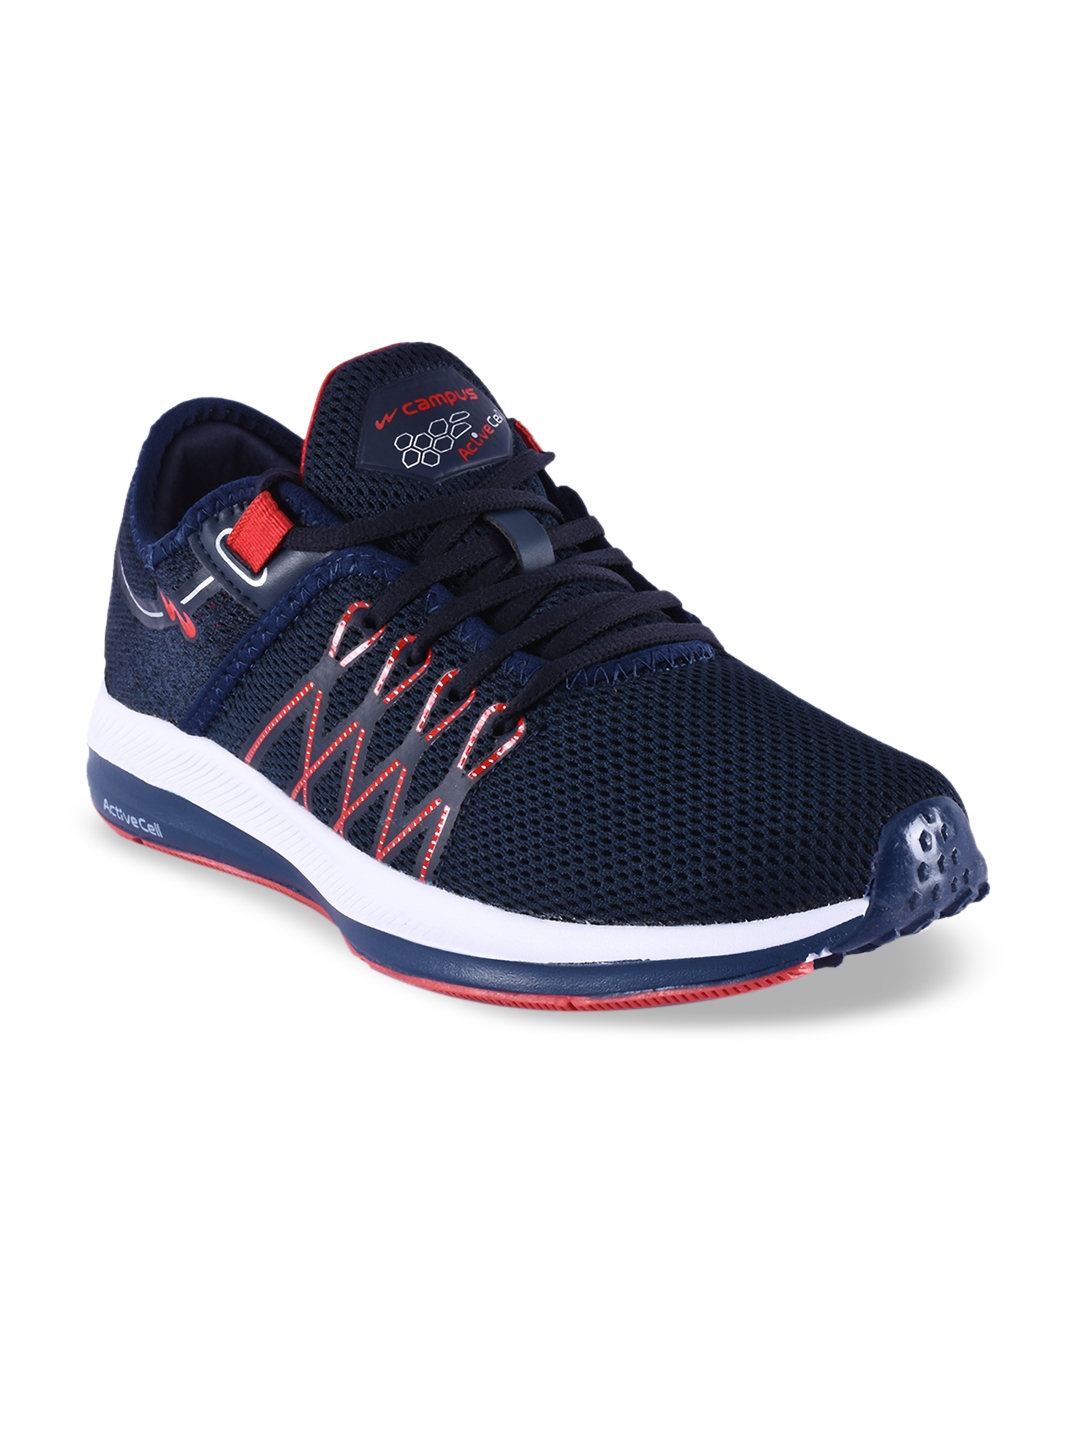 Buy Campus Men Navy Blue Running Shoes - Sports Shoes for Men 9538305 ...